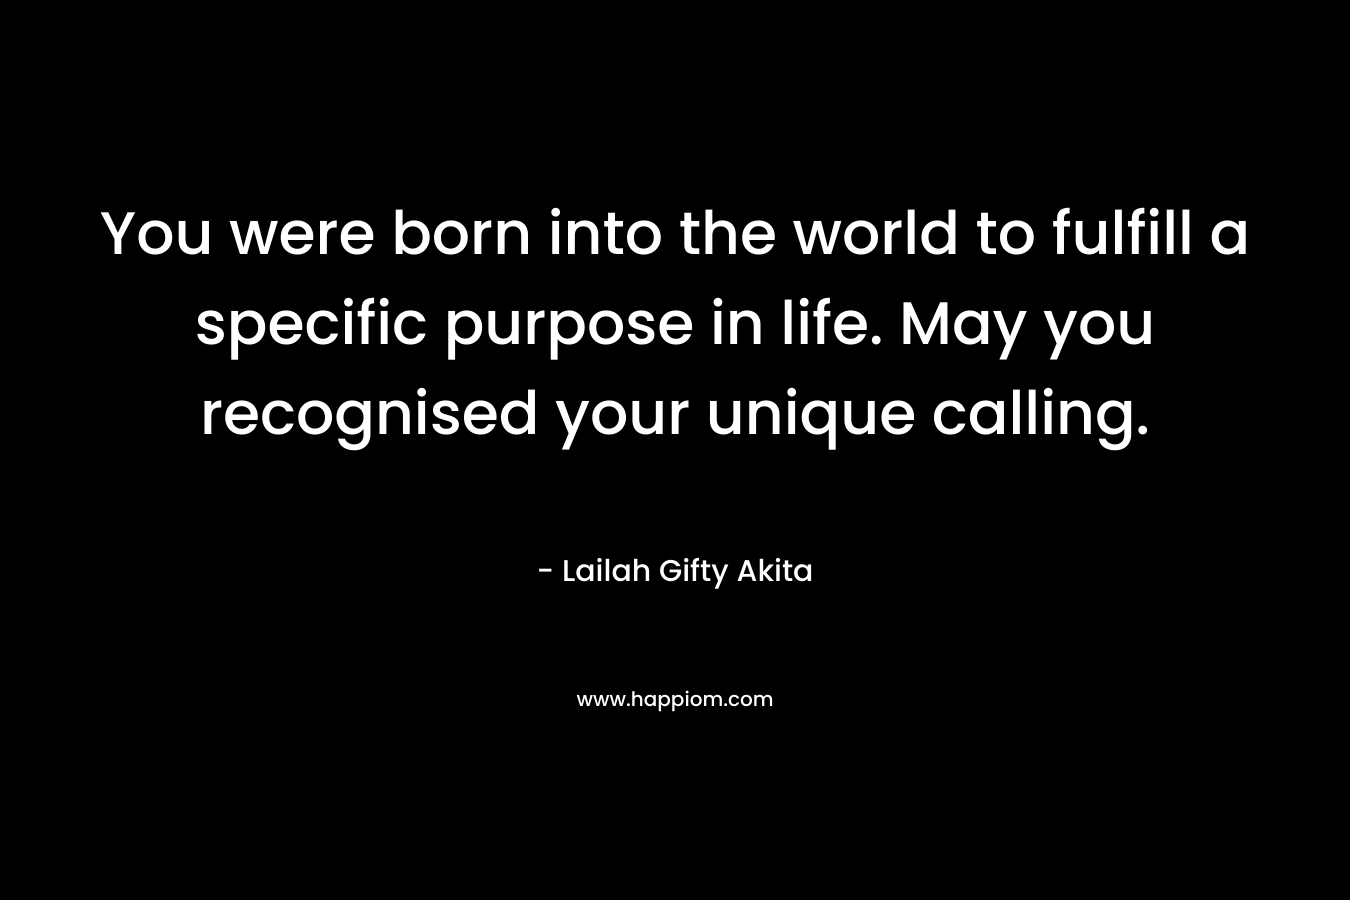 You were born into the world to fulfill a specific purpose in life. May you recognised your unique calling.